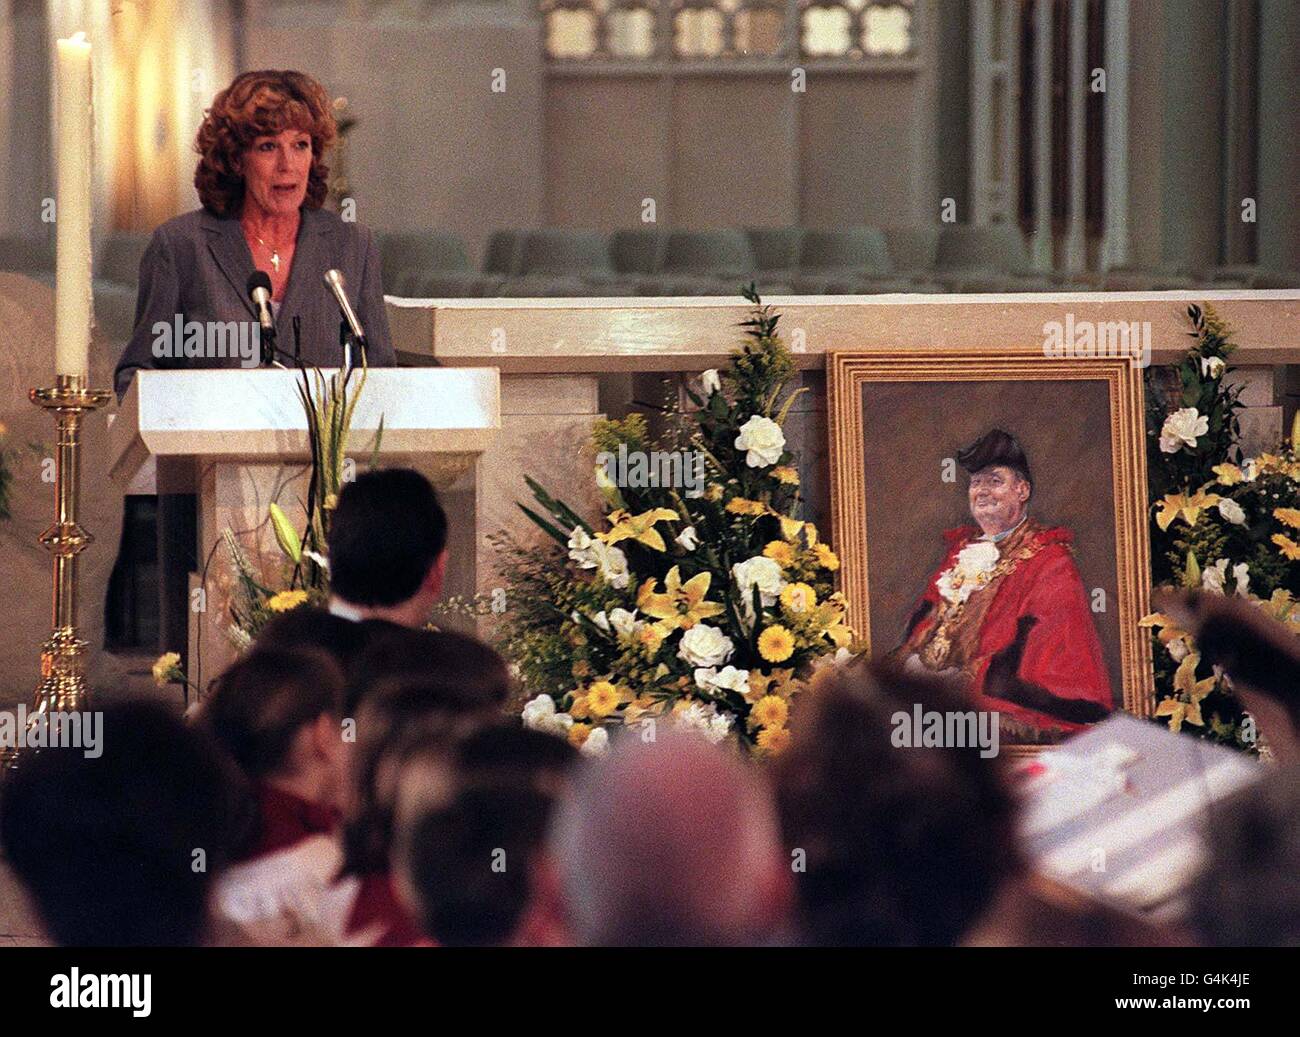 Coronation Street's Sue Nicholls, Bryan Mosley's on screen wife, speaking at Salford's Catholic cathedral during a special memorial service in his memory. Mosley, played grocer Alf Roberts in the TV soap for 37 years. Stock Photo